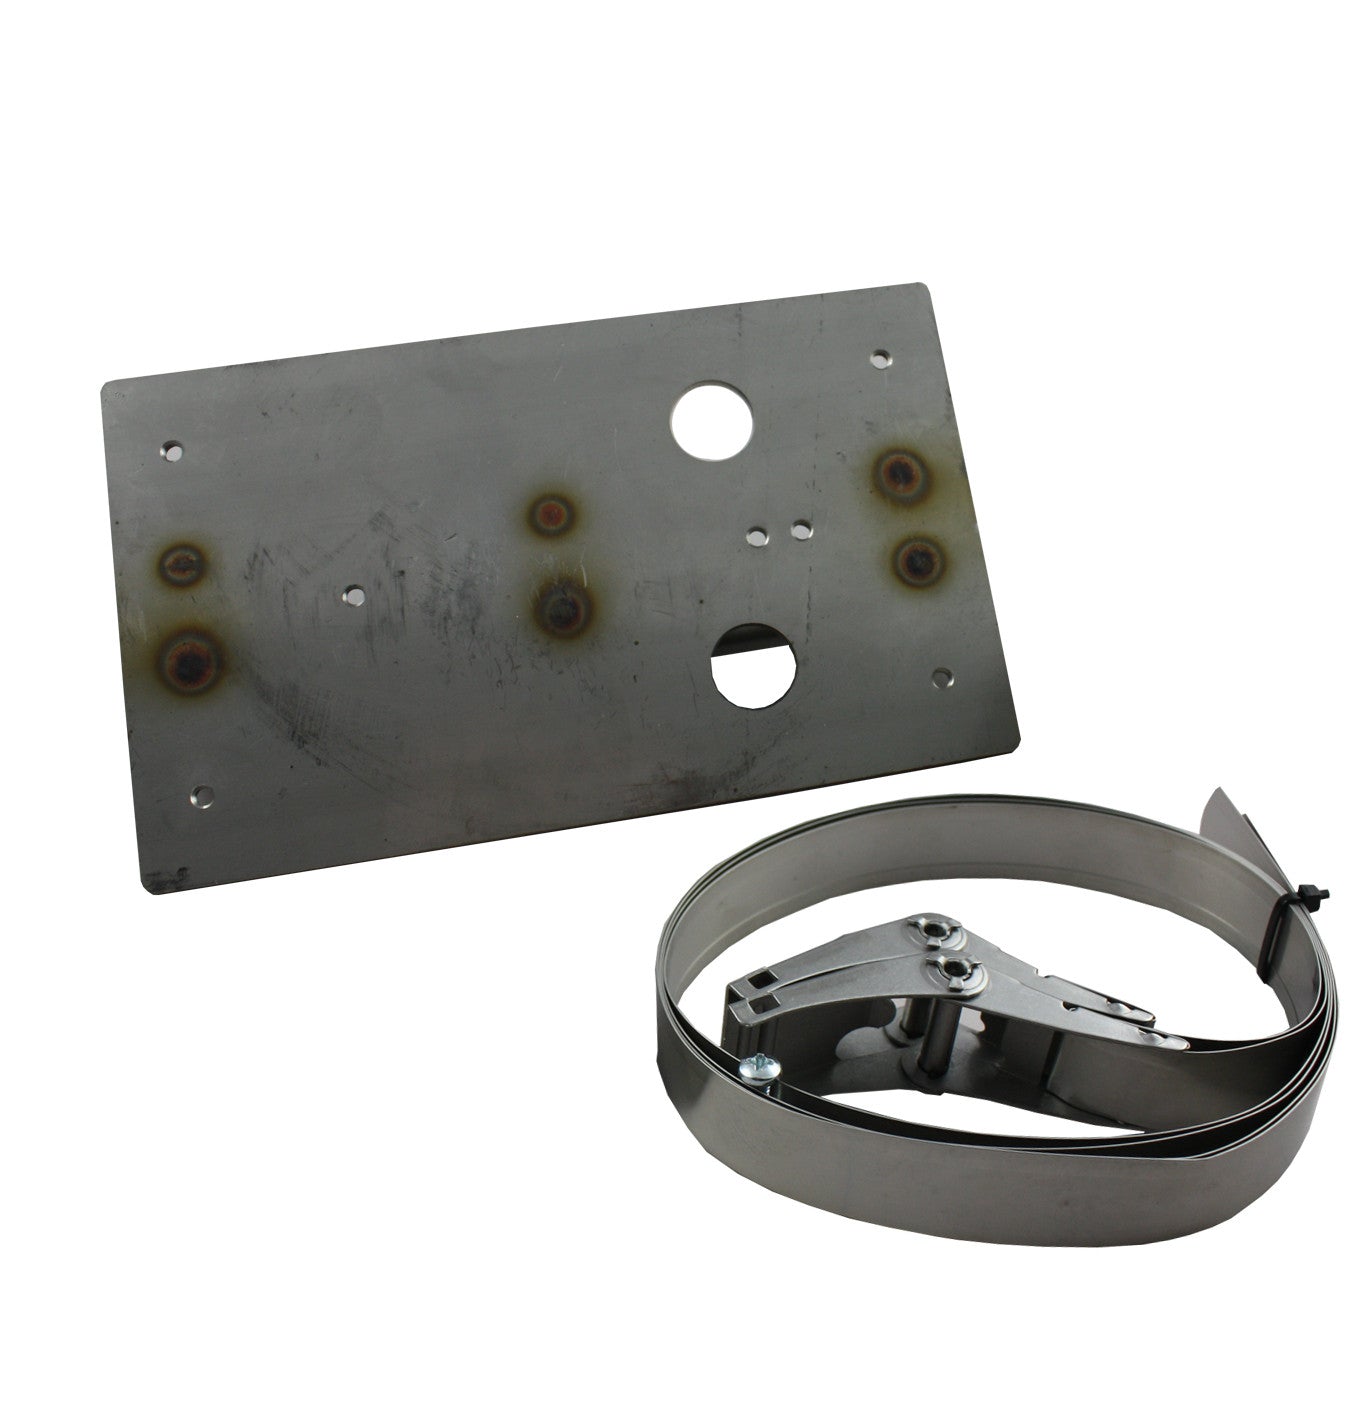 OPTEX RLS-PB Pole mount bracket for the RLS-3060 (Use with flexible conduit) - PAM Distributing Co